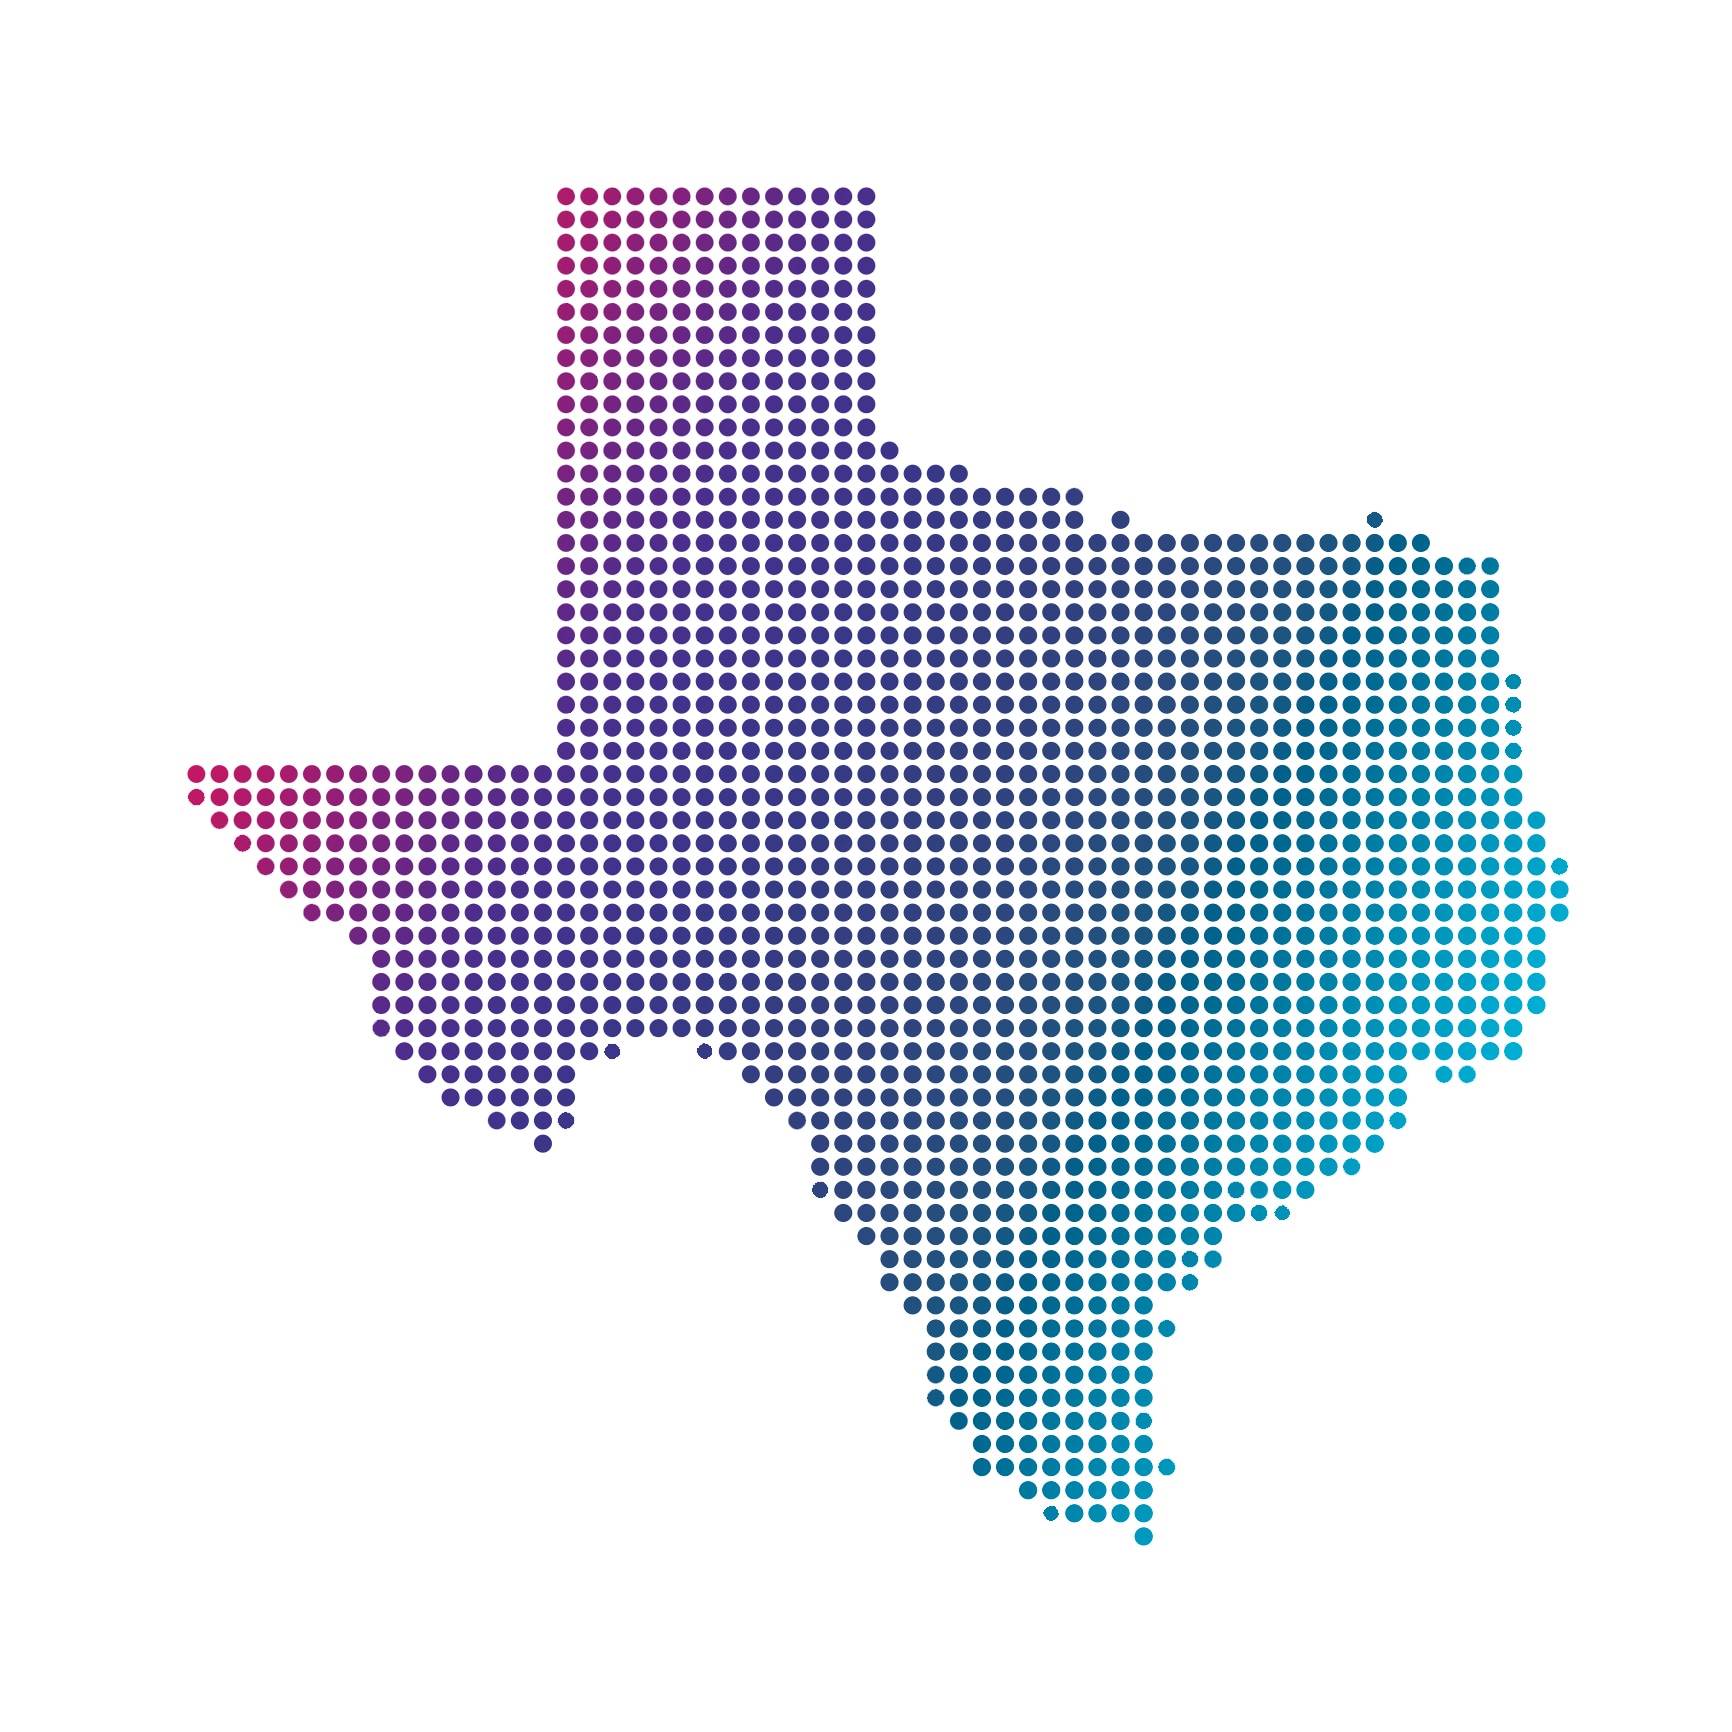 Texas map of blue dots on white background